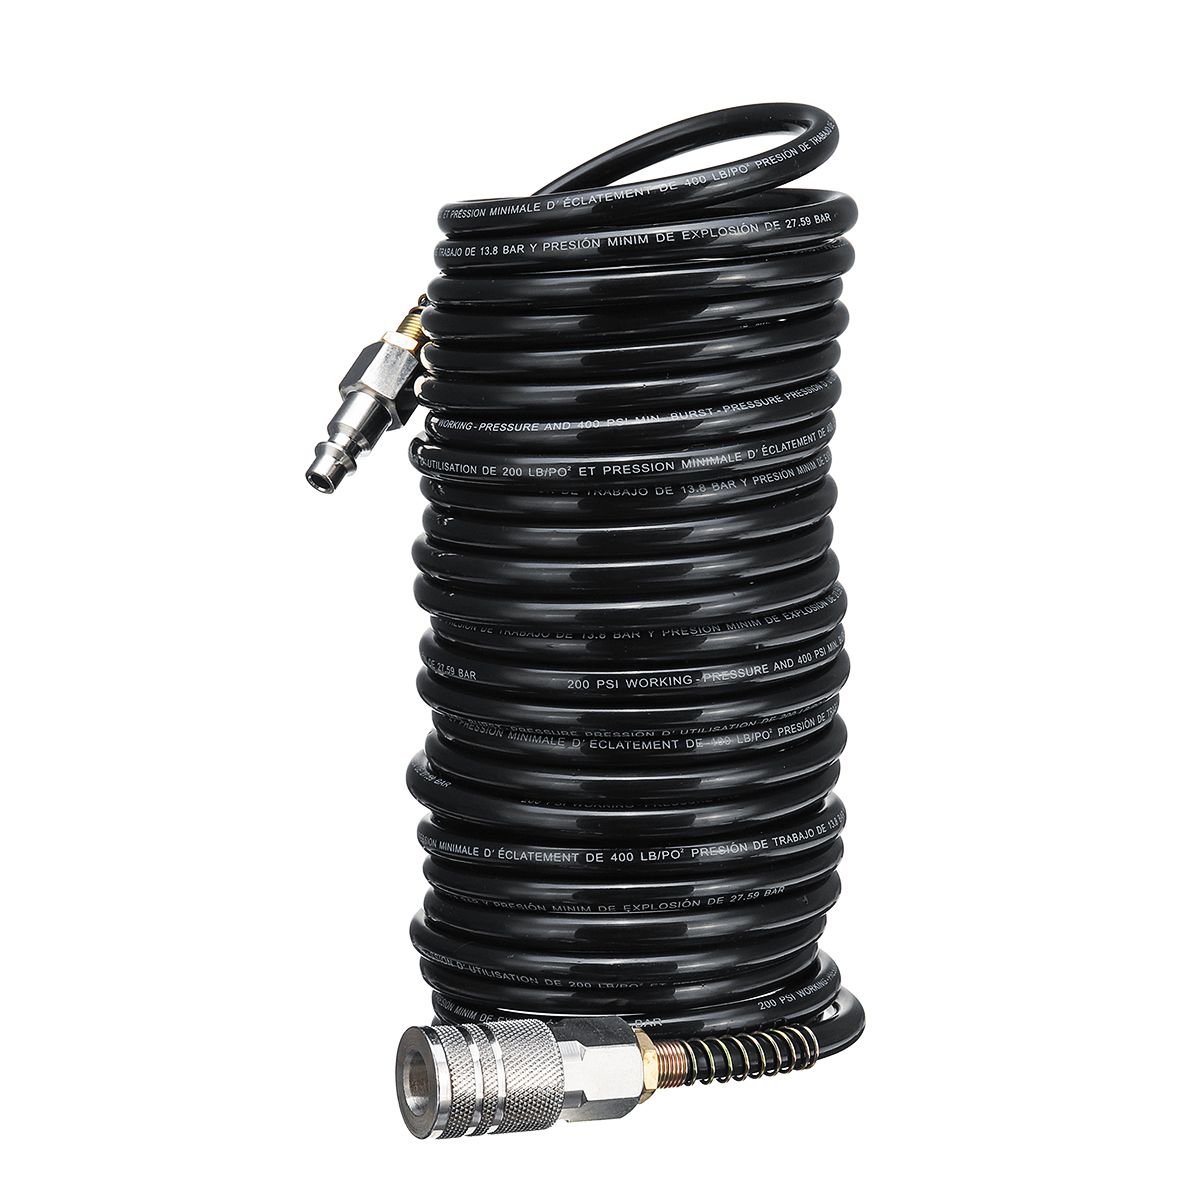 25FT-Air-Hose-Fittings-Recoil-Pneumatic-Airline-Compressor-200PSI-Quick-Coupler-1323414